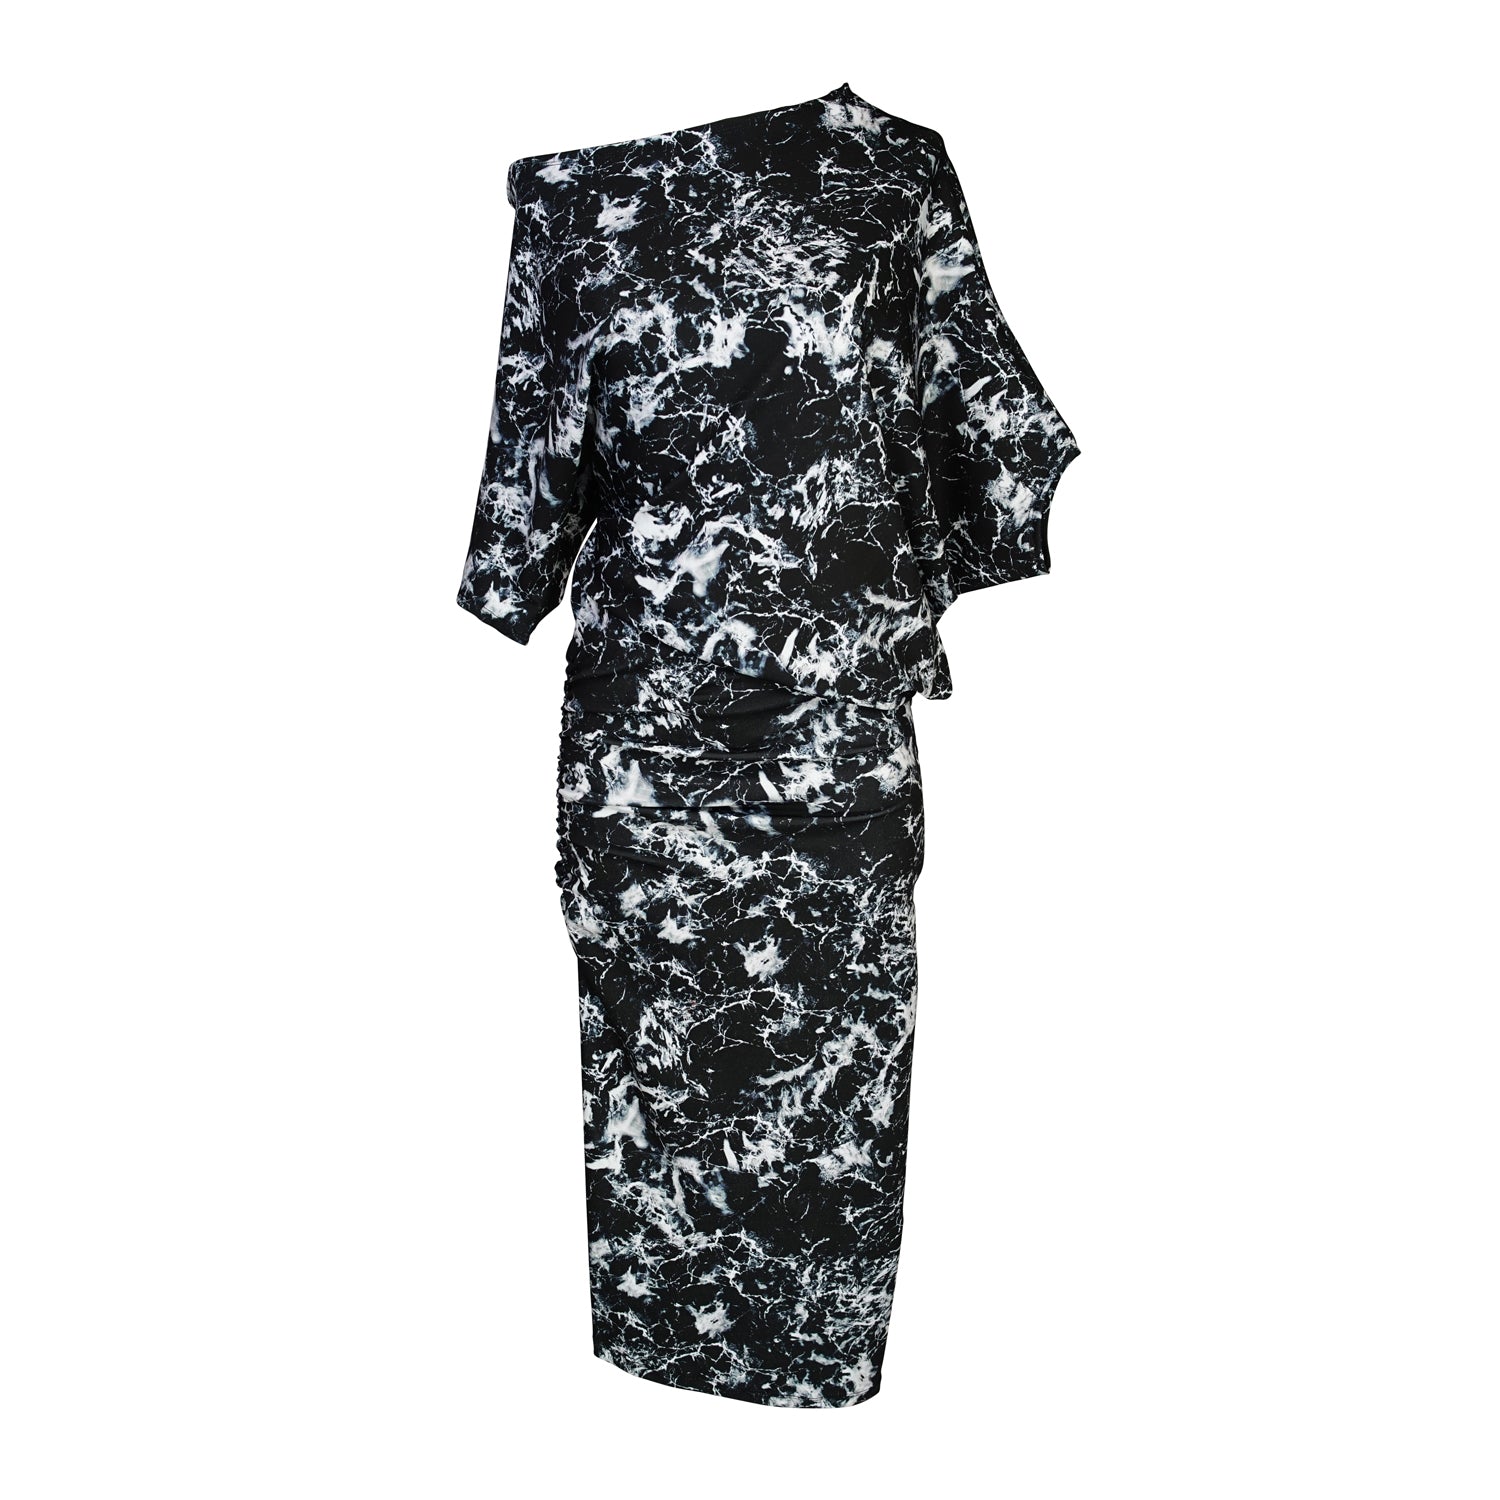 Stretchy black and white marble printed dress. Made from stretchy jersey fabric, this dress features a fitted pencil skirt fit with light ruching at the hip. Mid-length angled sleeves can arrange the neckline to reveal a peek of the shoulder. Hemline is just below knee length.